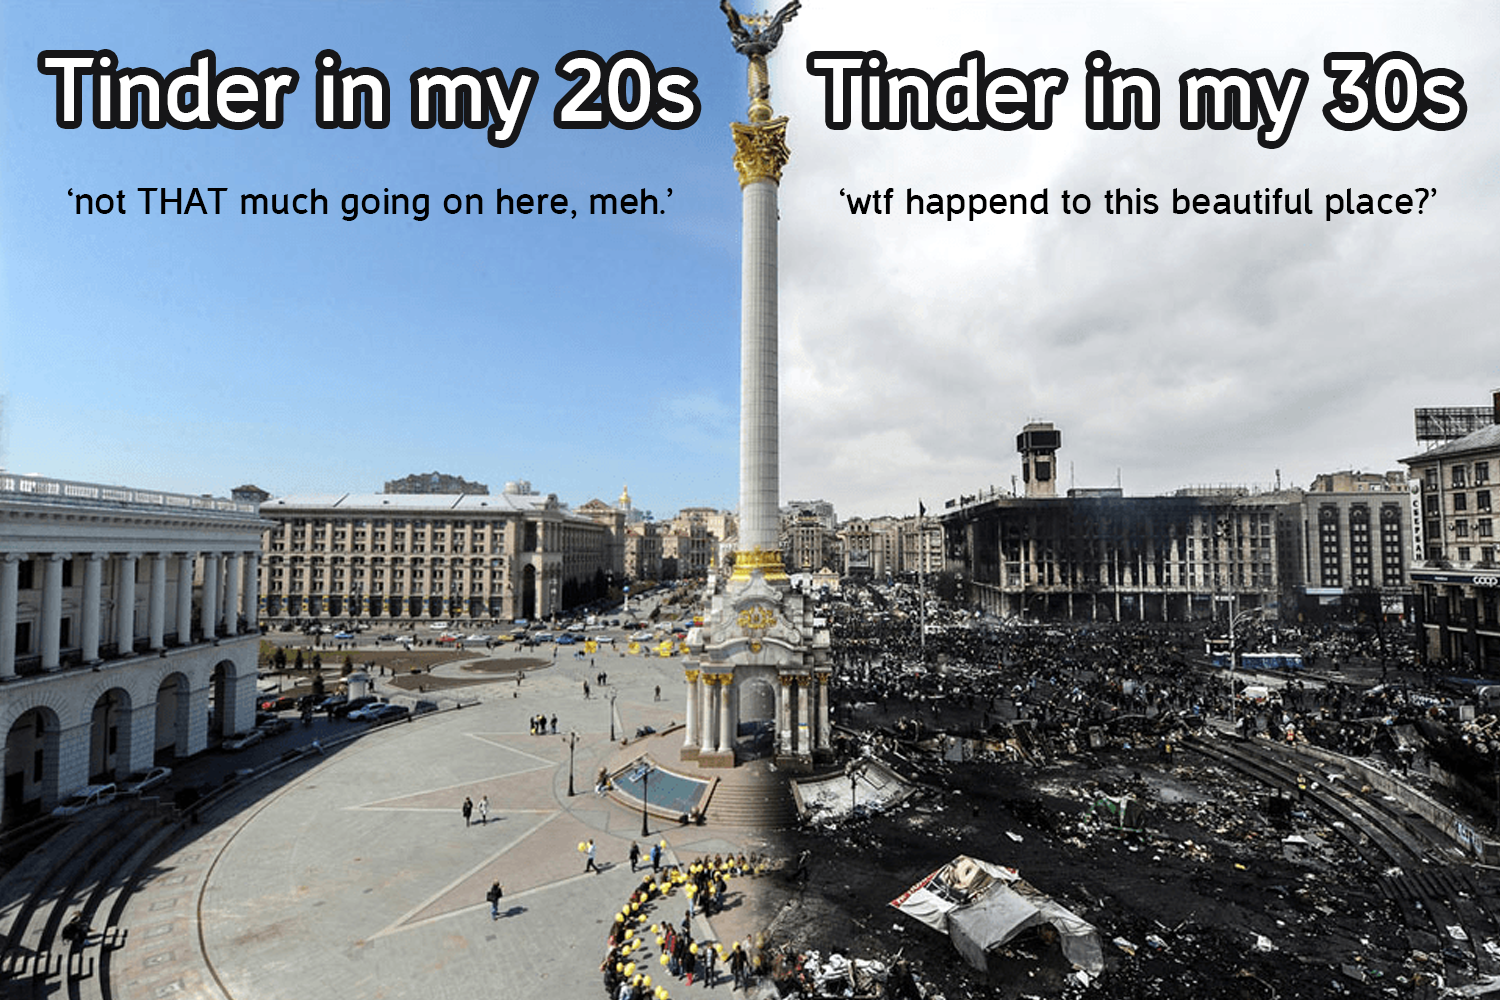 dank memes - independence square - Tinder in my 20s Tinder in my 30s 'not That much going on here, meh.' wtf happend to this beautiful place?' A Lale Til wif 14 Ceeeeee